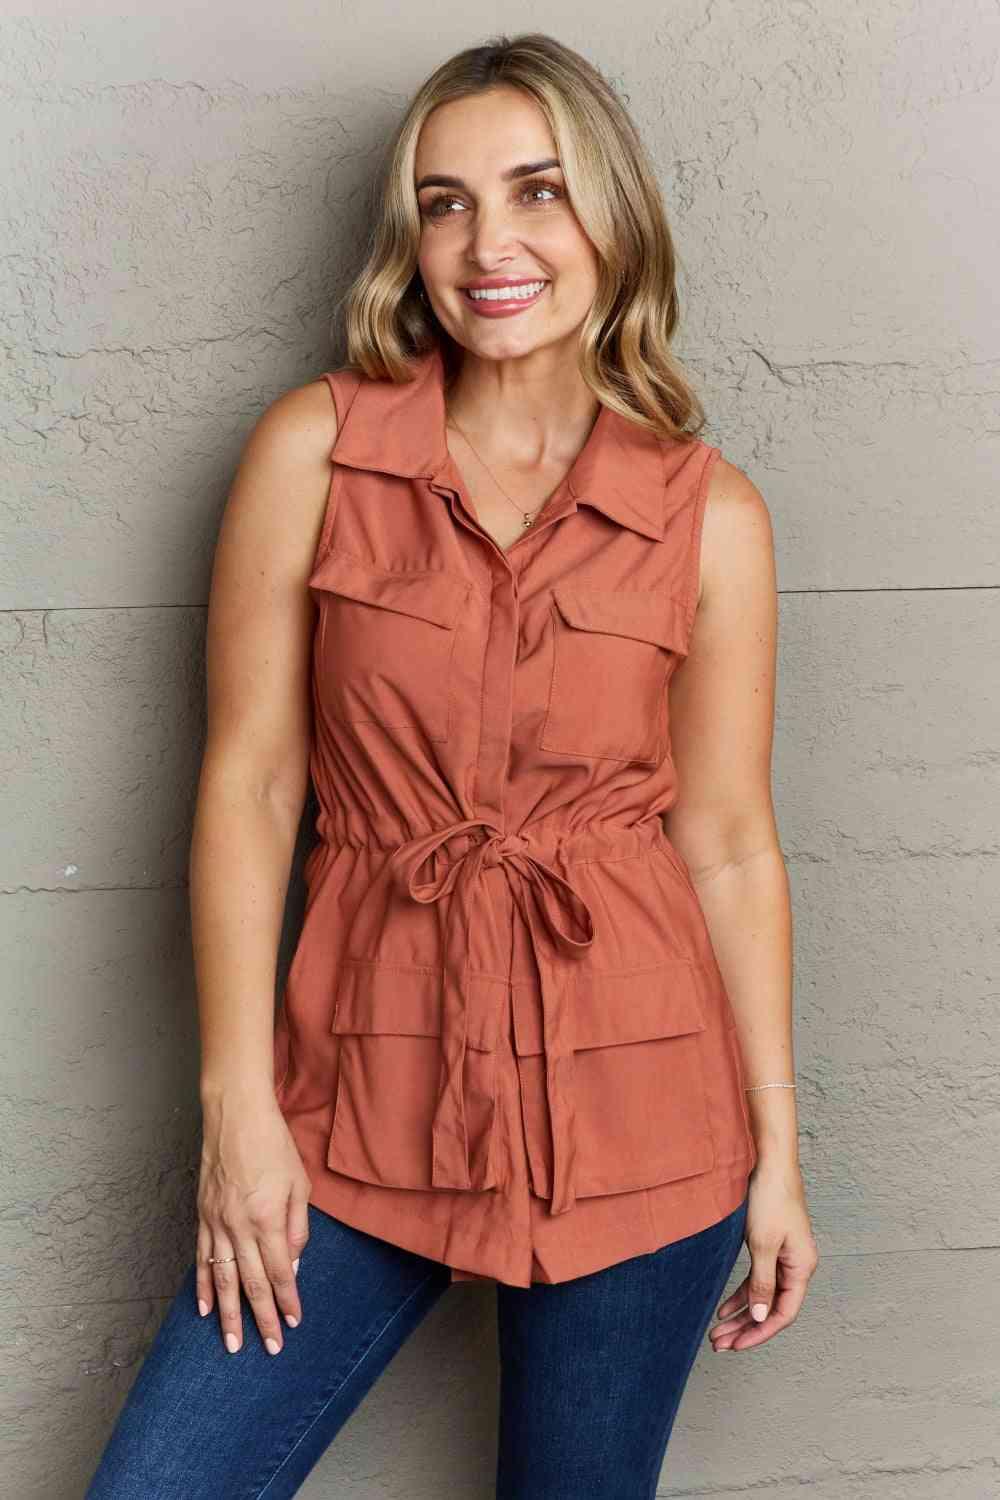 Women's Shirts Sleeveless Collared Button Down Red Top